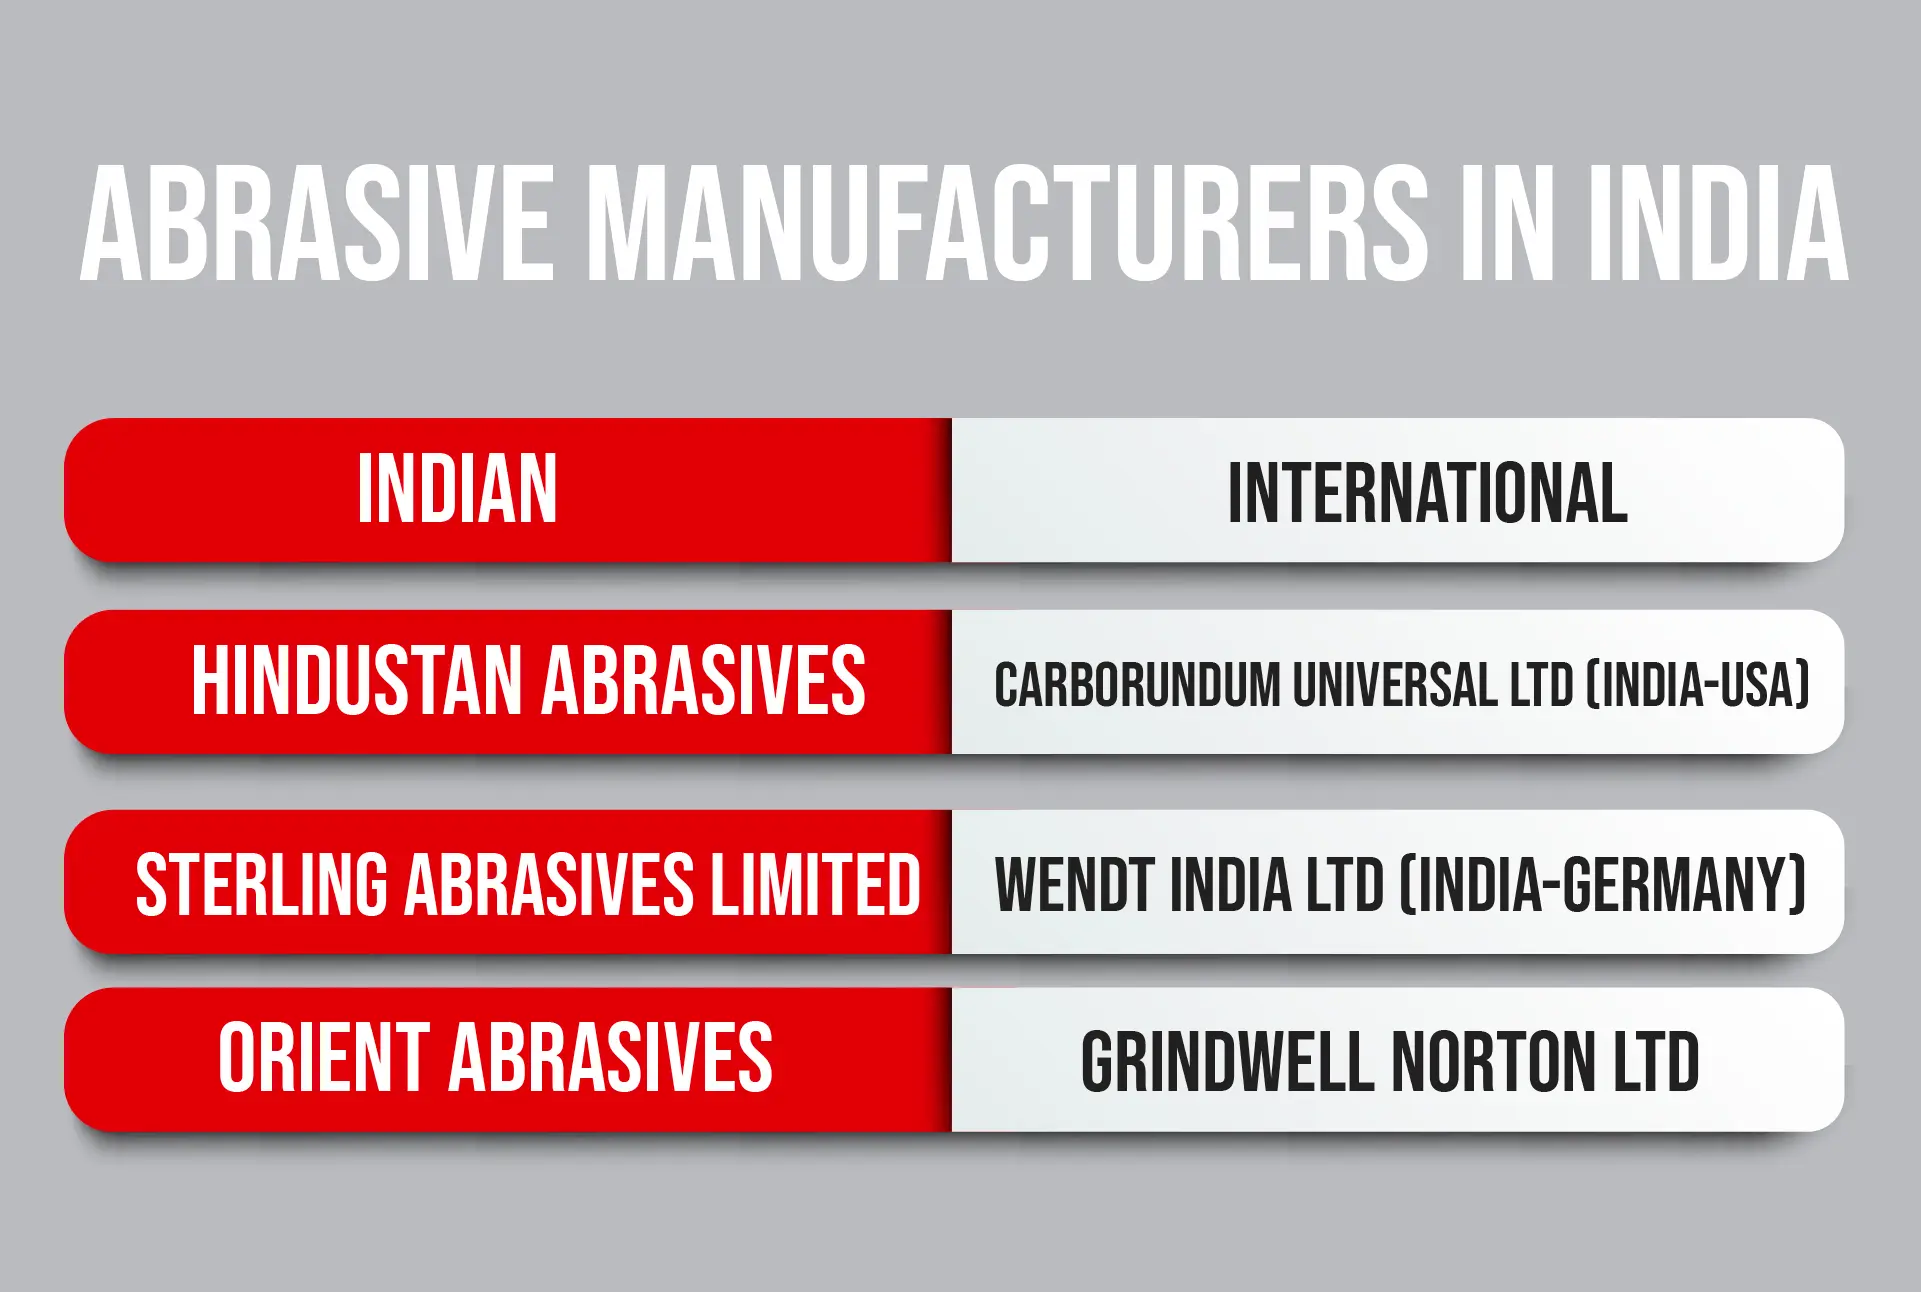 Domestic and international abrasive manufacturers in India